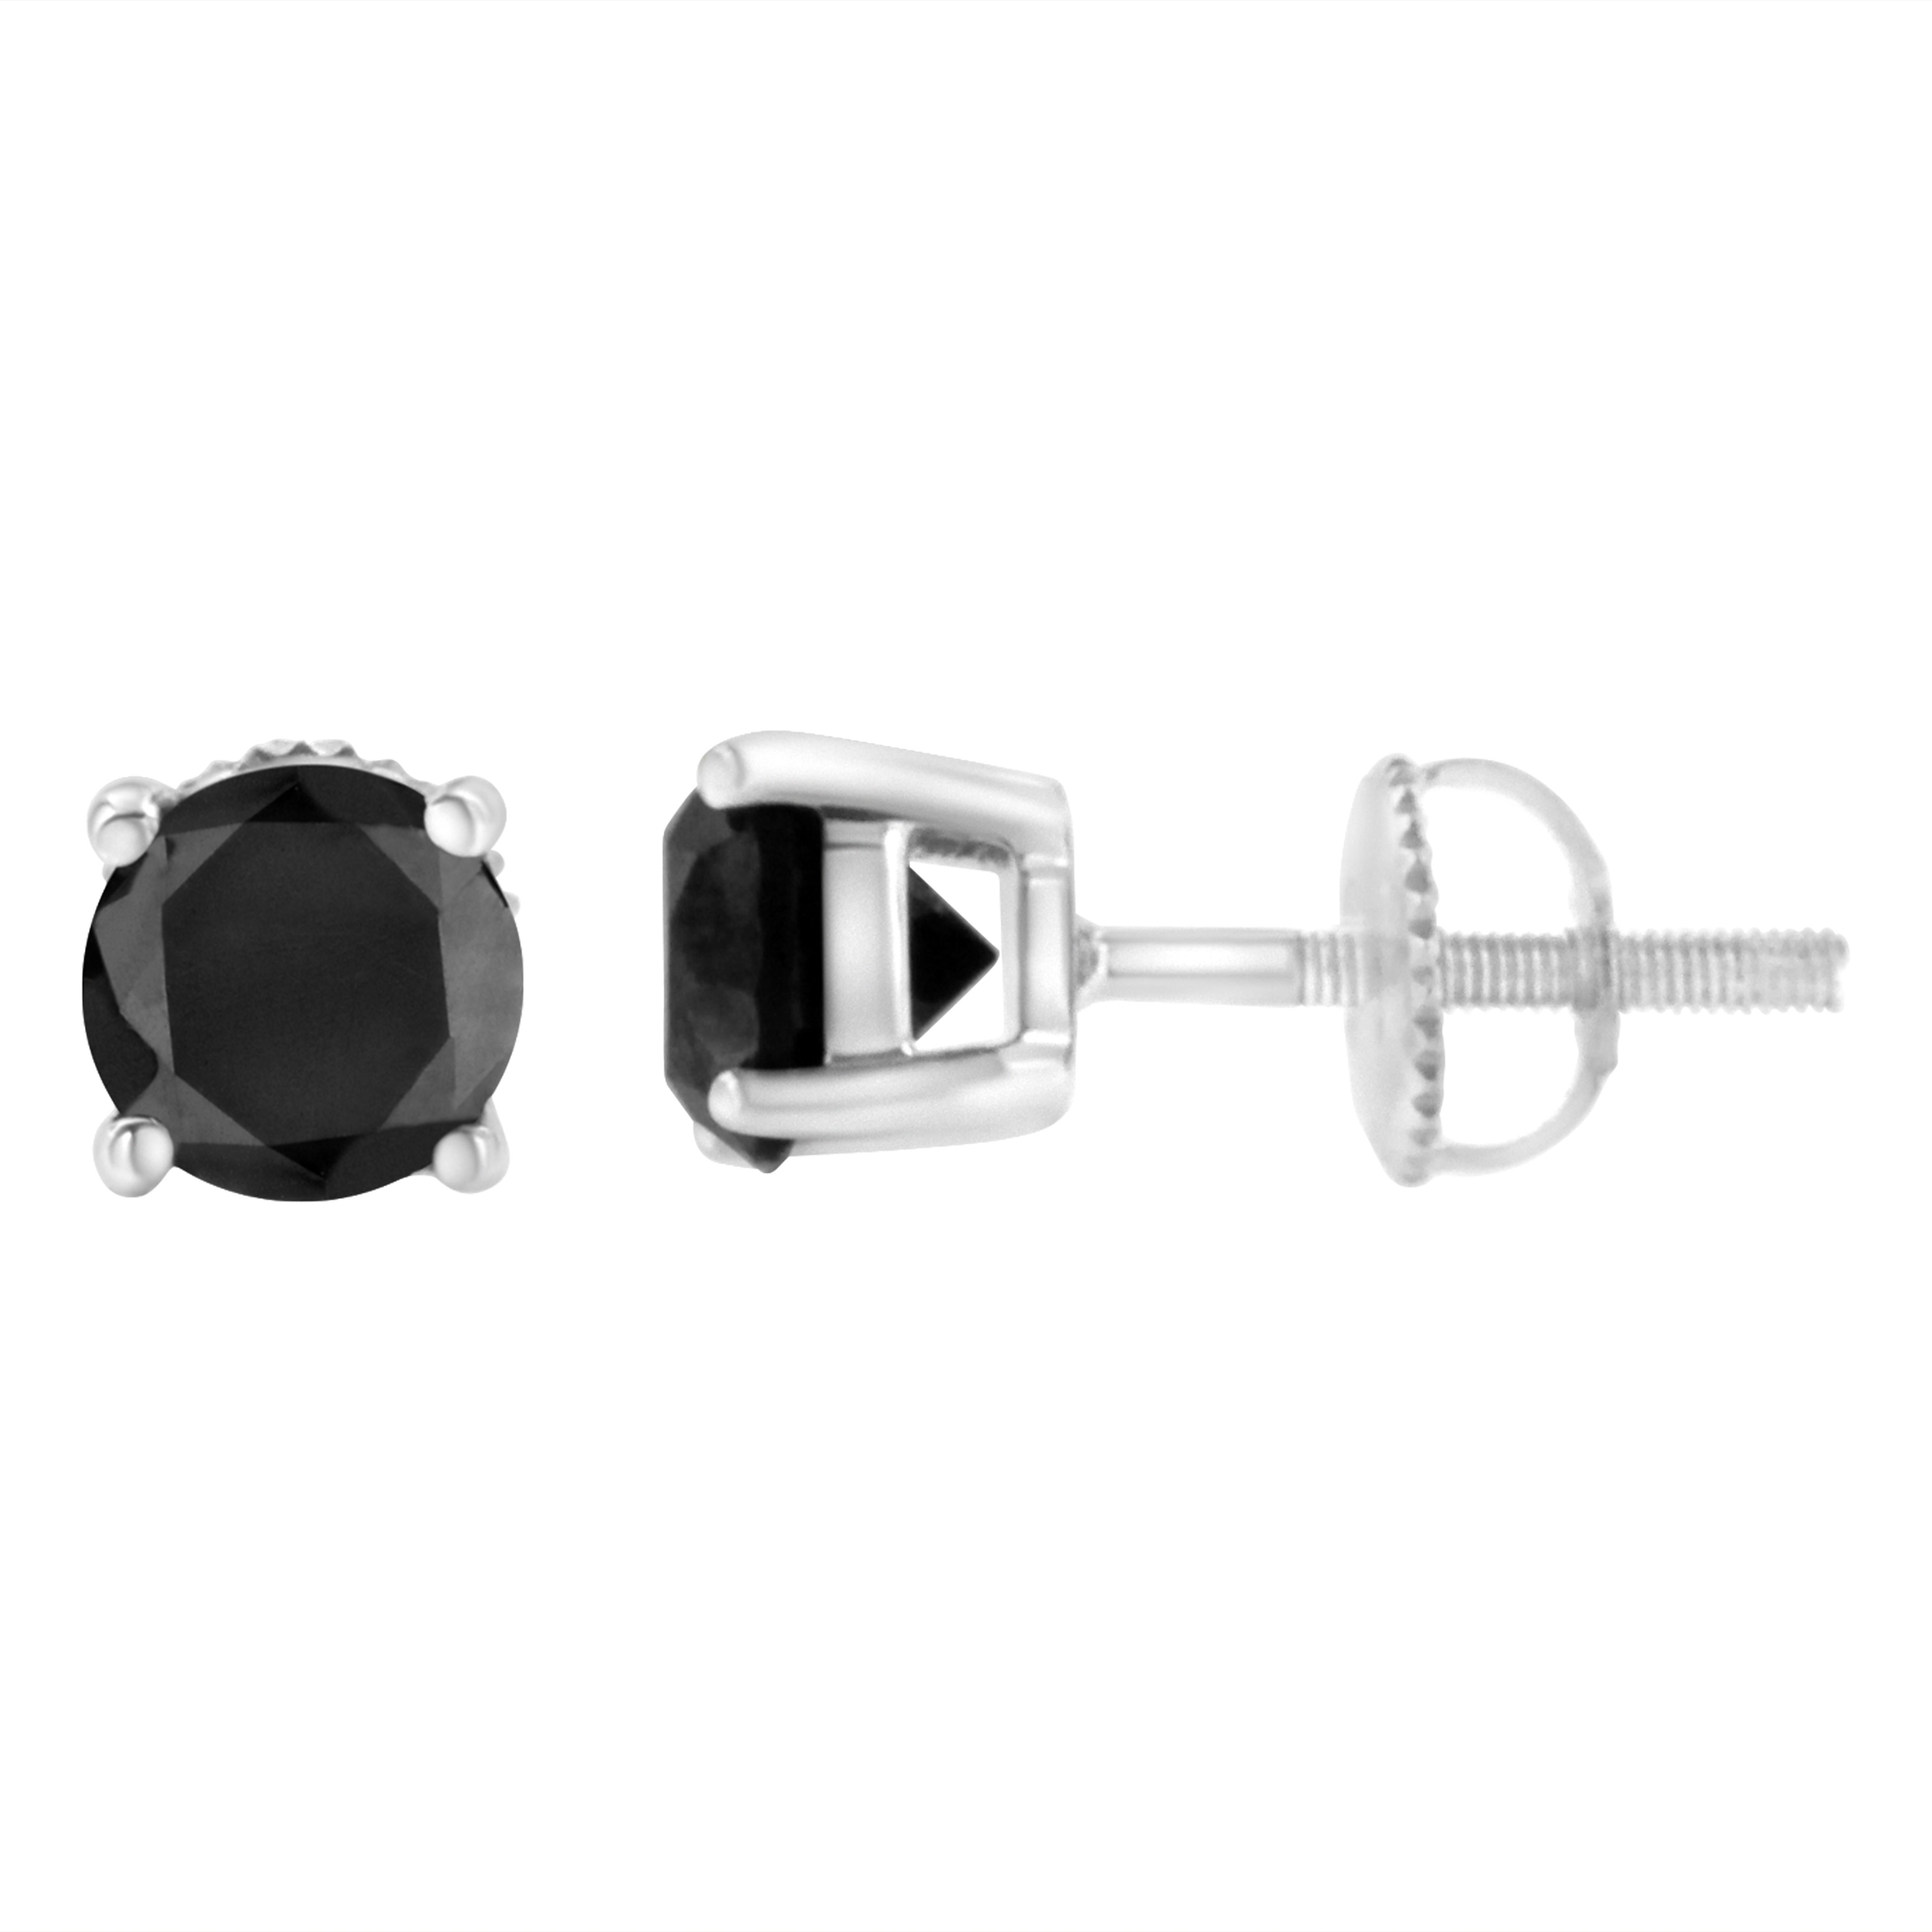 Add this stunningly unique diamond stud earrings to your jewelry collection and impress all your girlfriends. This beautiful pair of treated black studs are made from the finest 14k white gold, and is embellished with treated, black round-cut